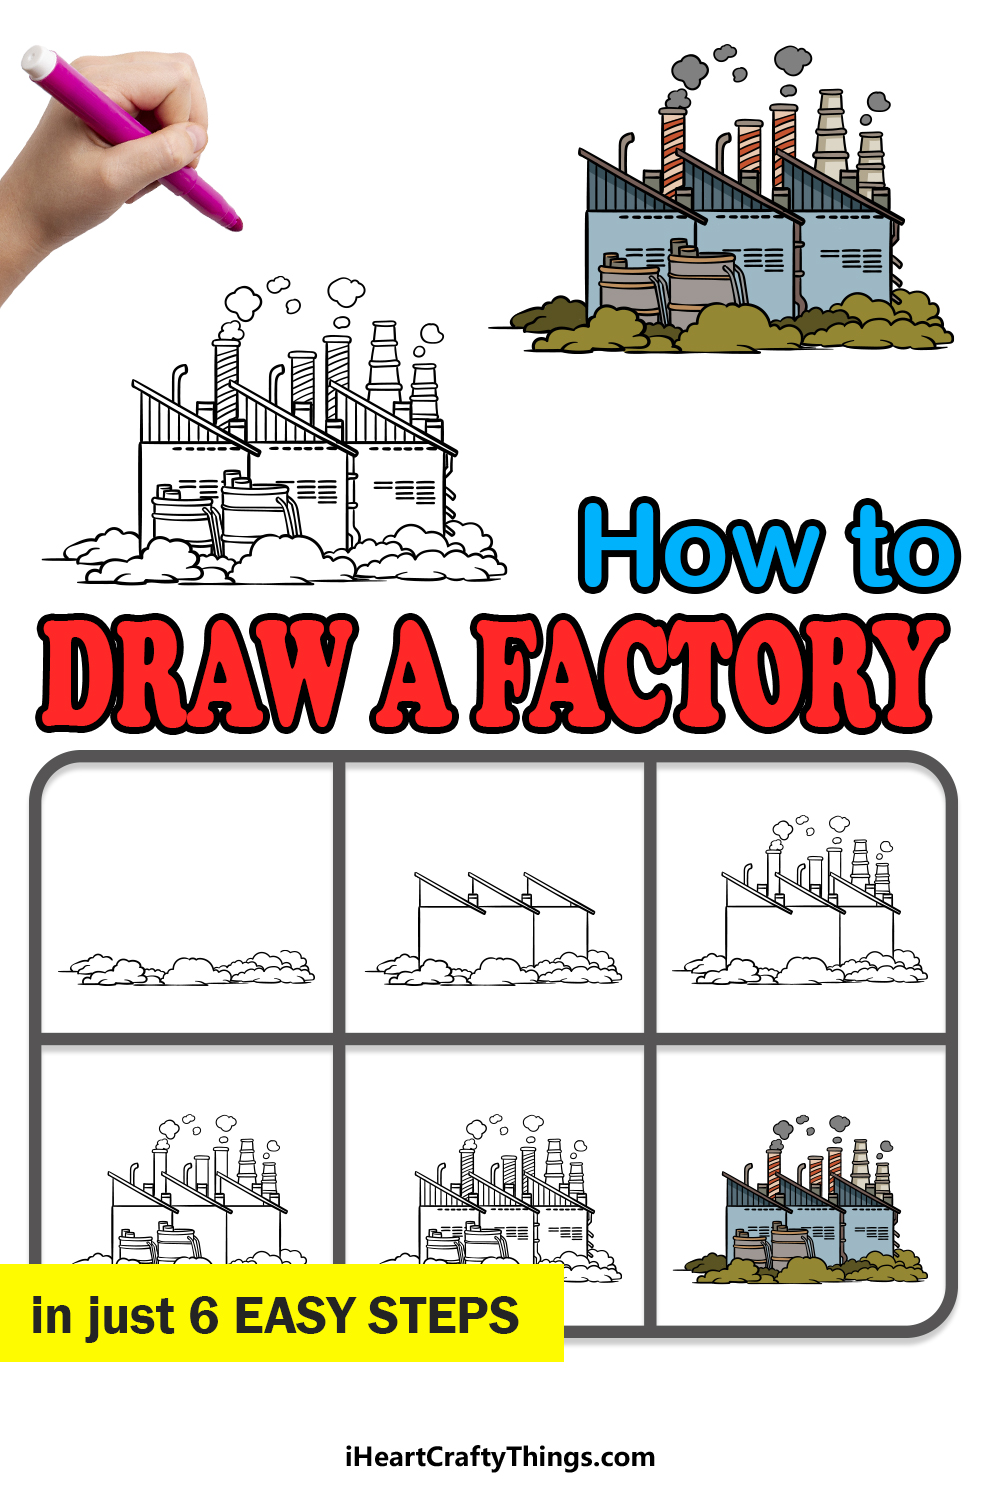 how to draw a factory in 6 easy steps